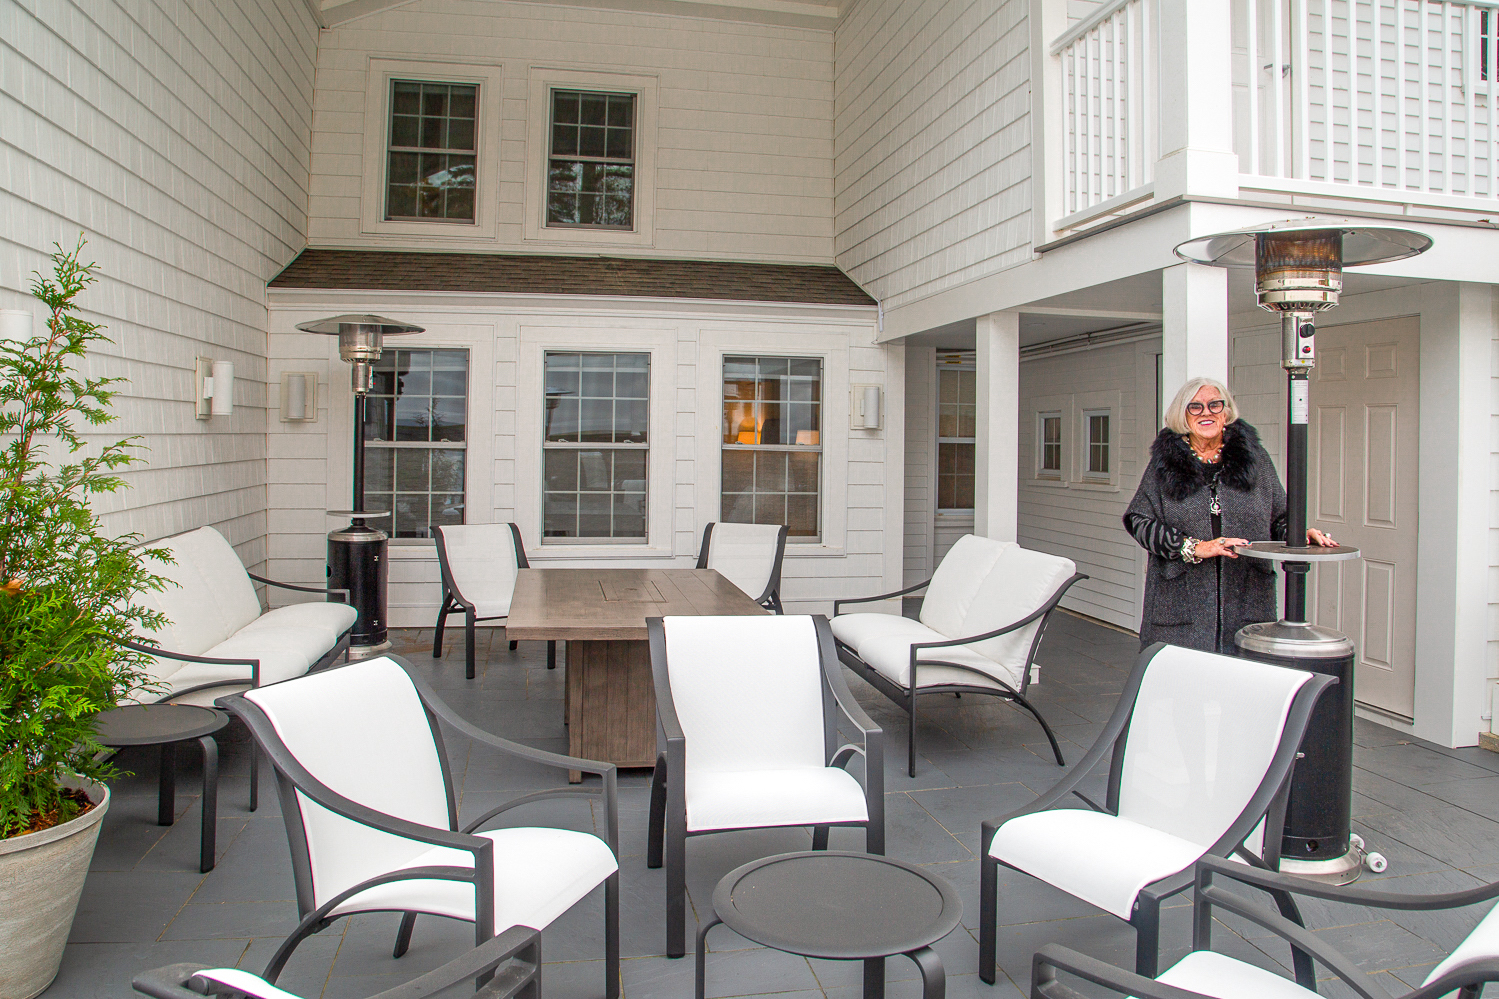 Gail stands on the patio with sleek patio furniture in front of a historical building with white siding.